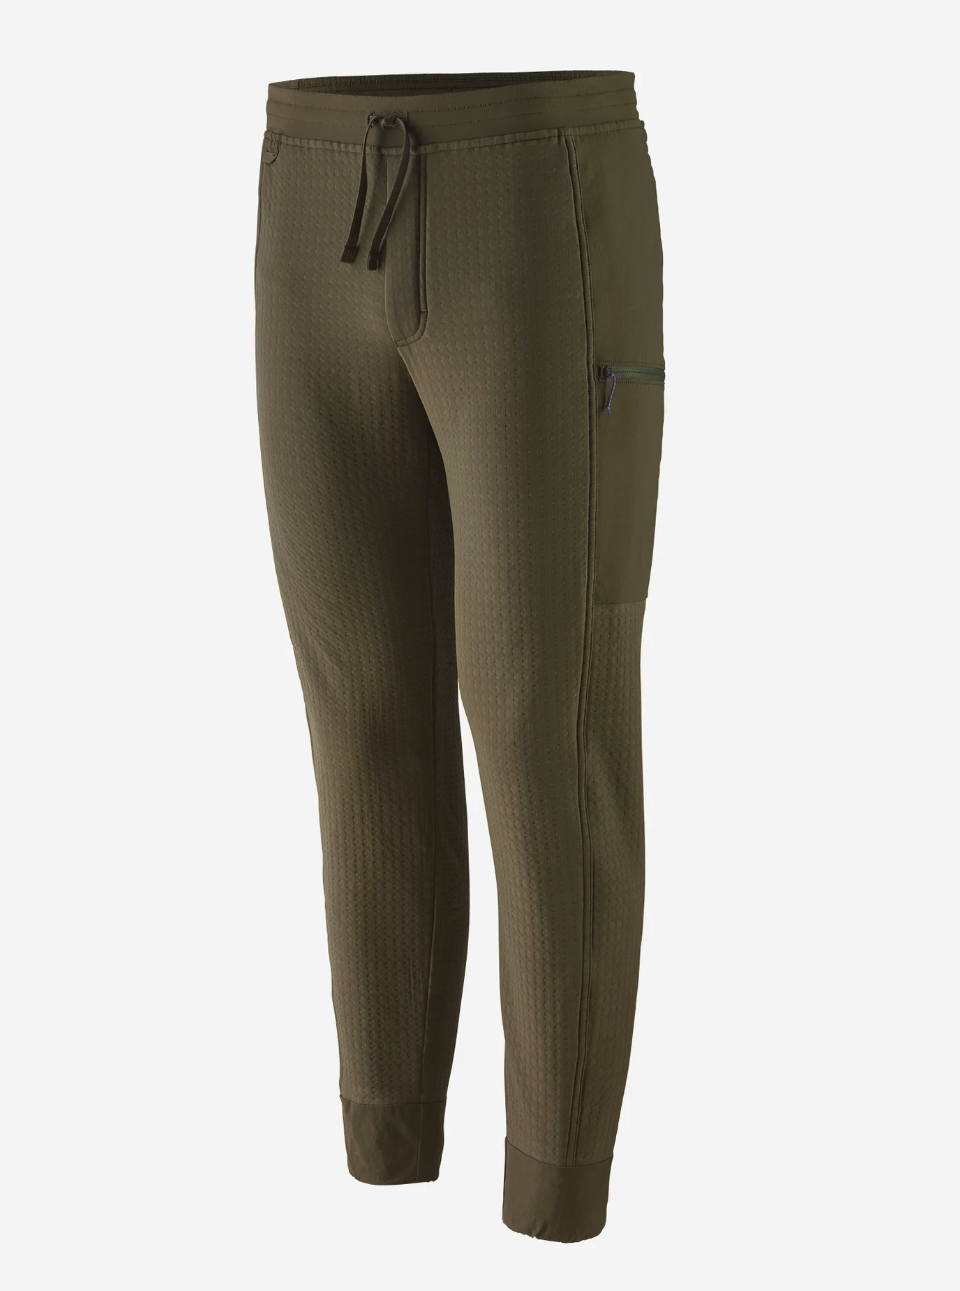 Session GD Wading Pants - DRYFT™ Fishing Waders